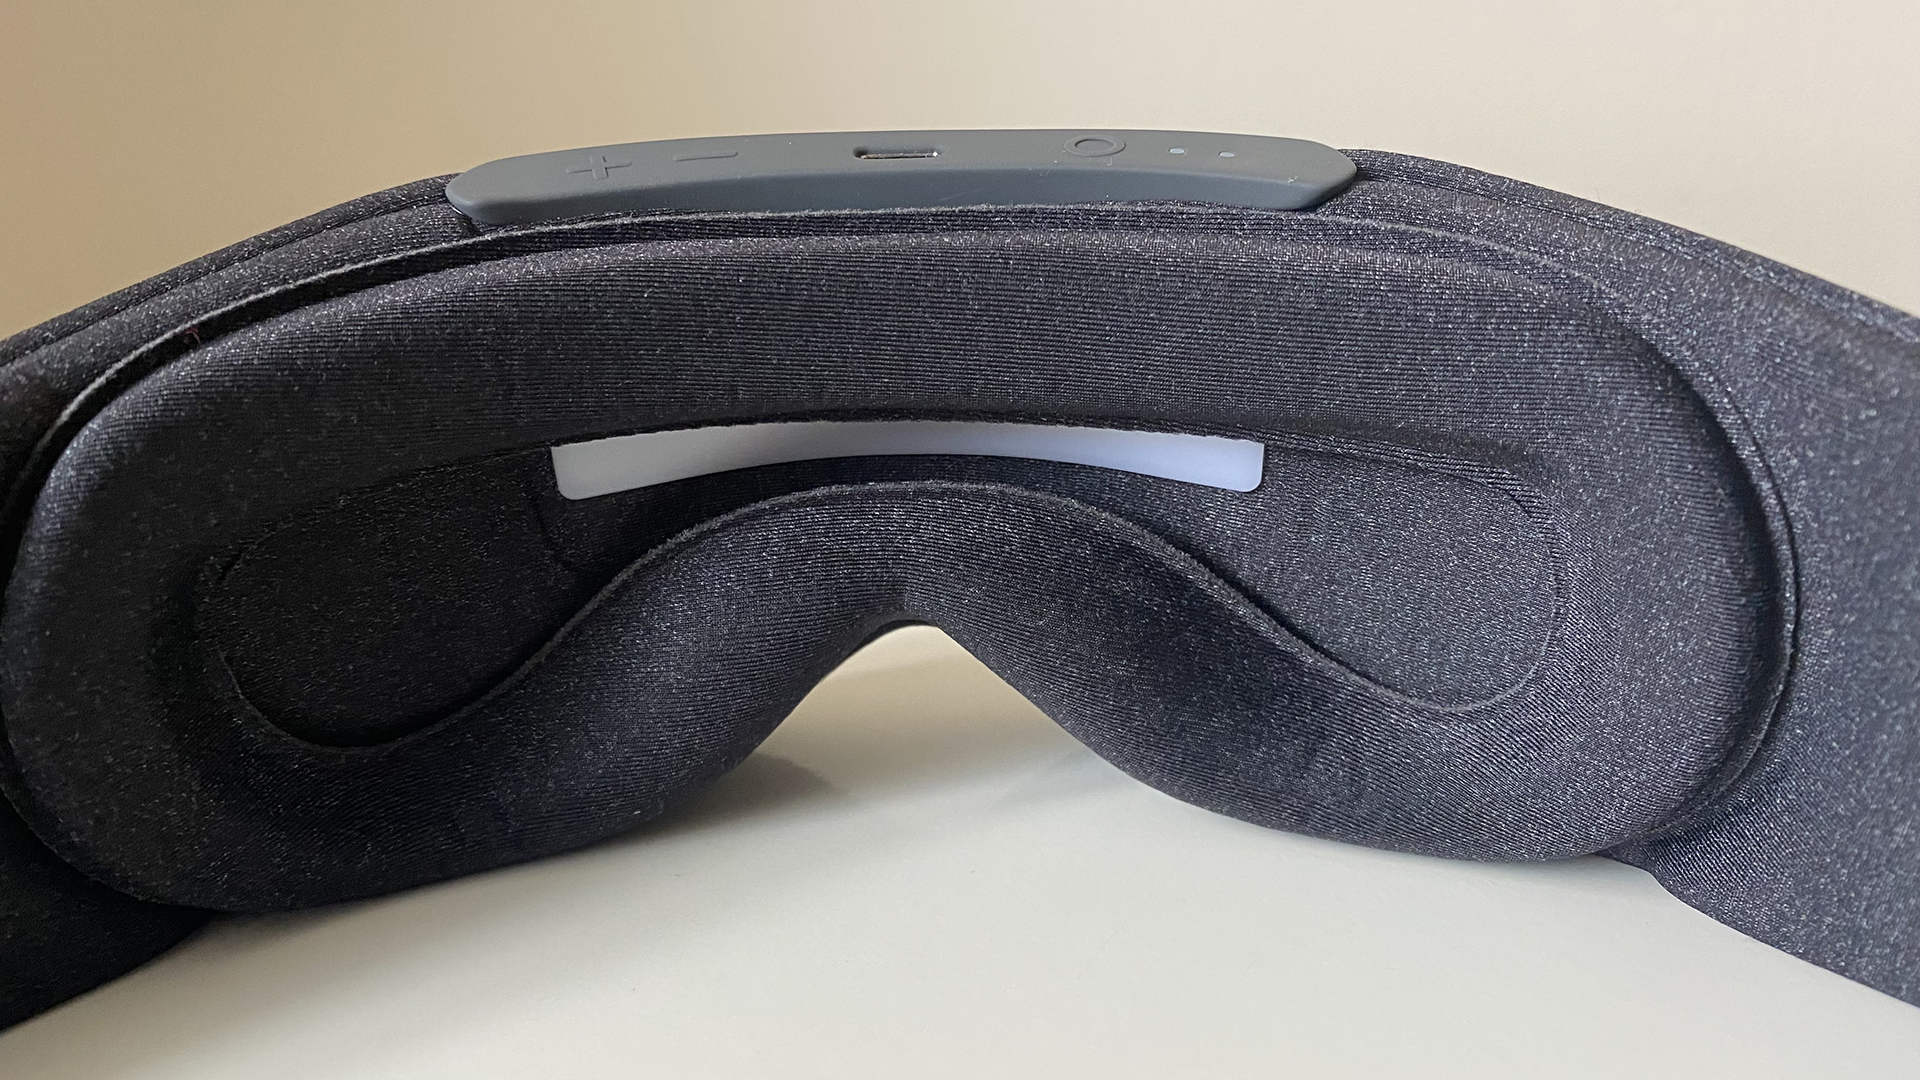 The glow bar on the inside of the Aura smart sleep mask, surrounded by the 3D hug cushion